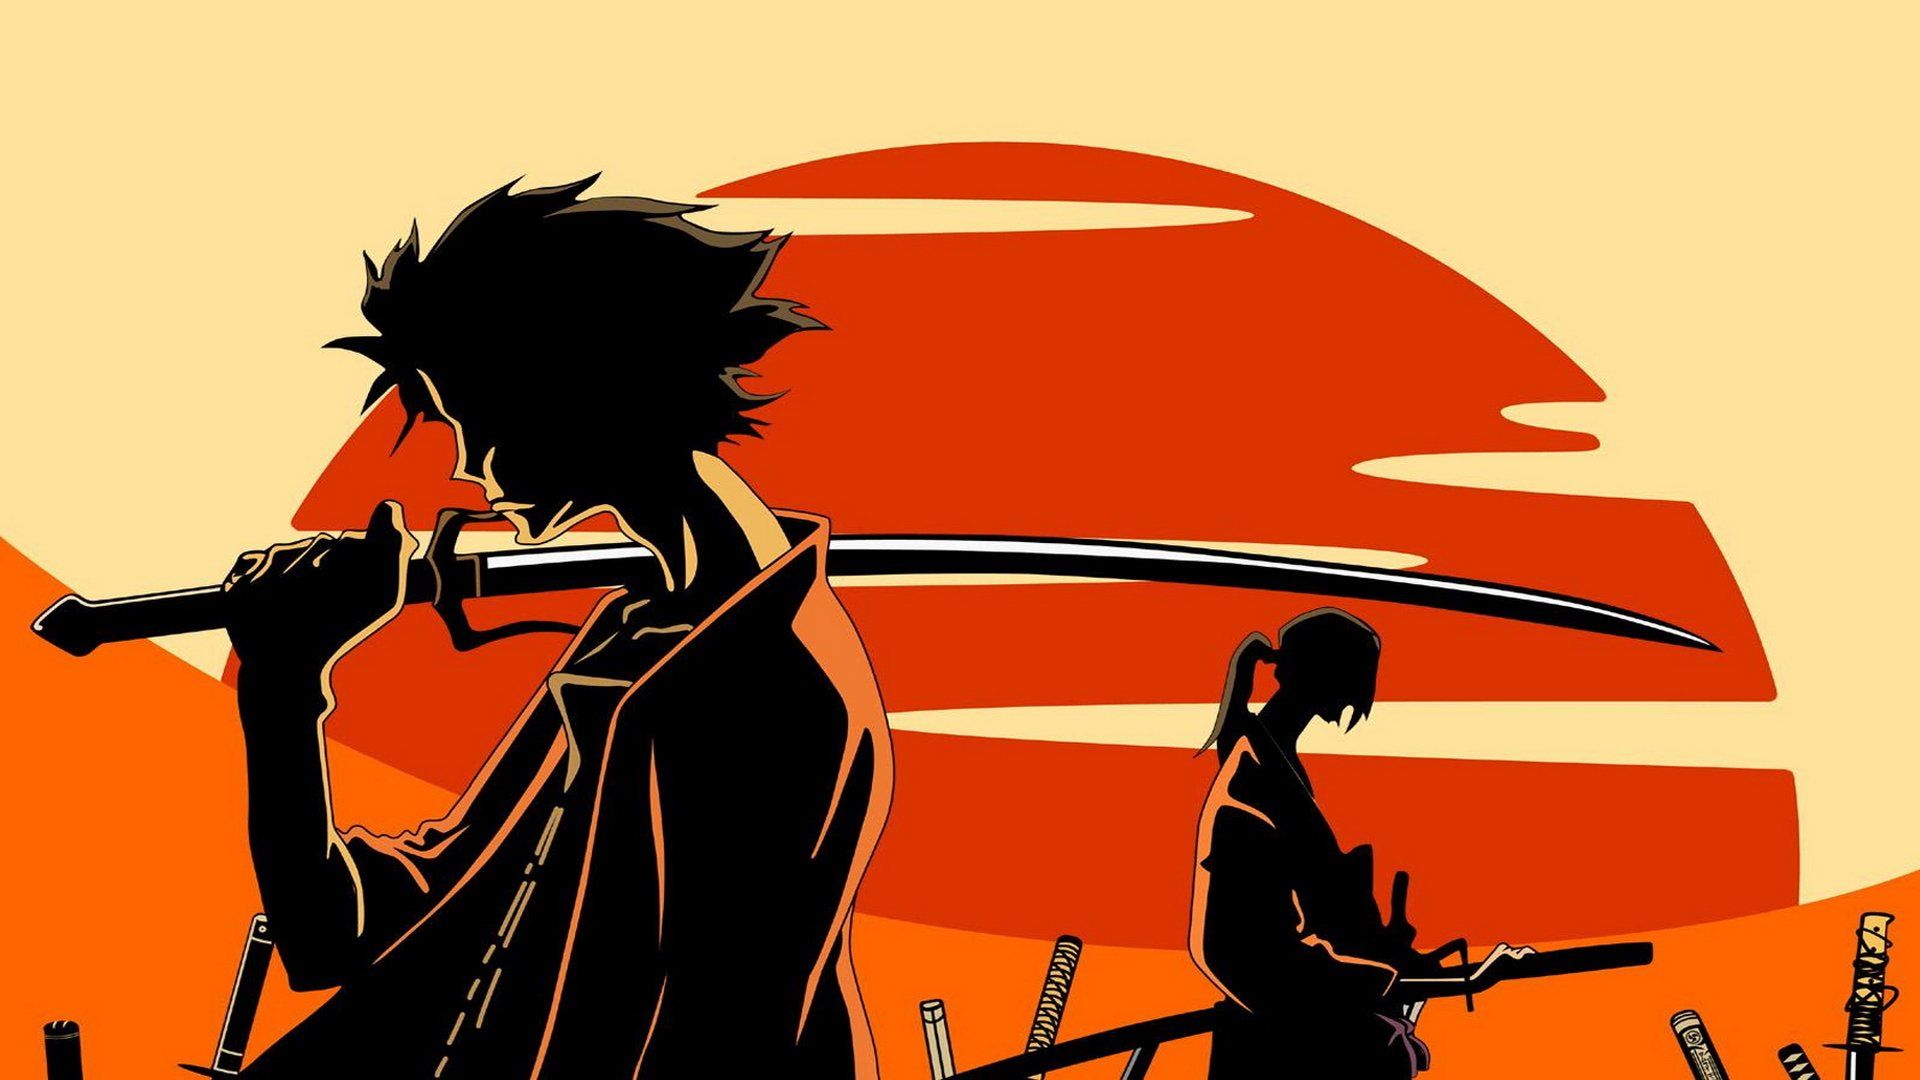 A man and woman holding swords in front of an orange sunset - Samurai